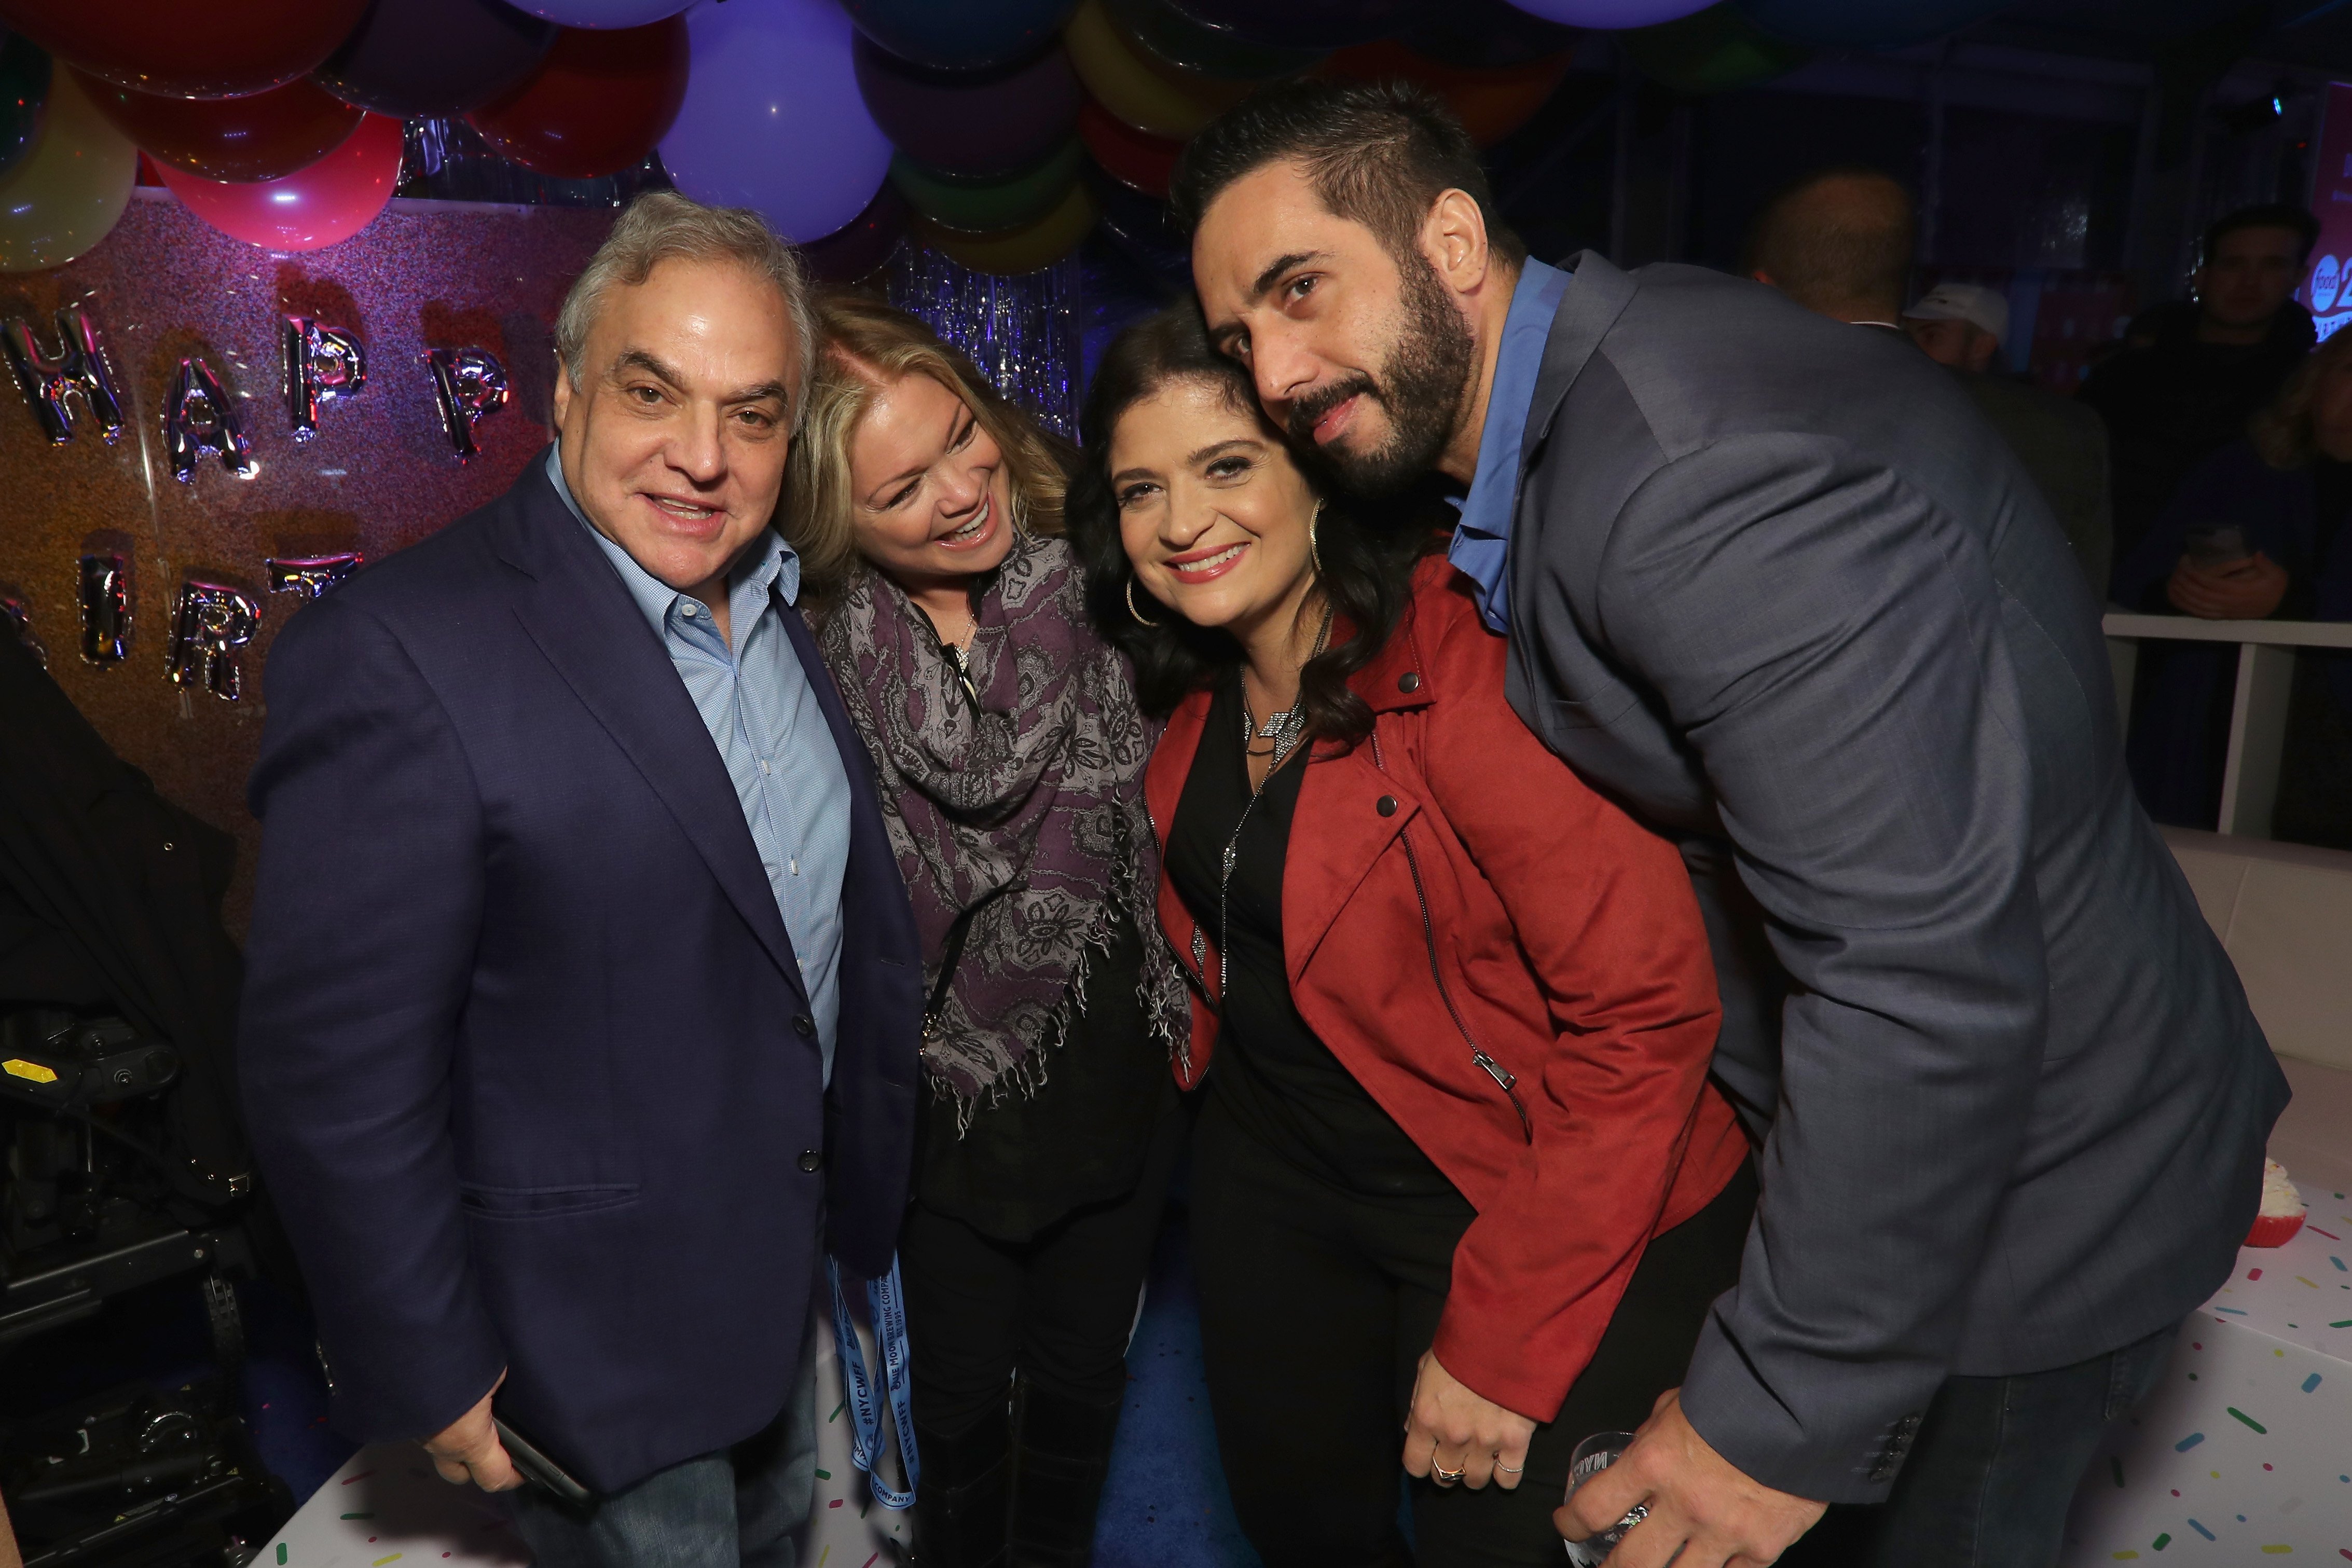 NYCWFF founder Lee Schrager, Valerie Bertinelli, Alex Guarnaschelli, and Michael Castellon during the Food Network's rooftop birthday party at Pier 92 on October 13, 2018 in New York City. / Source: Getty Images